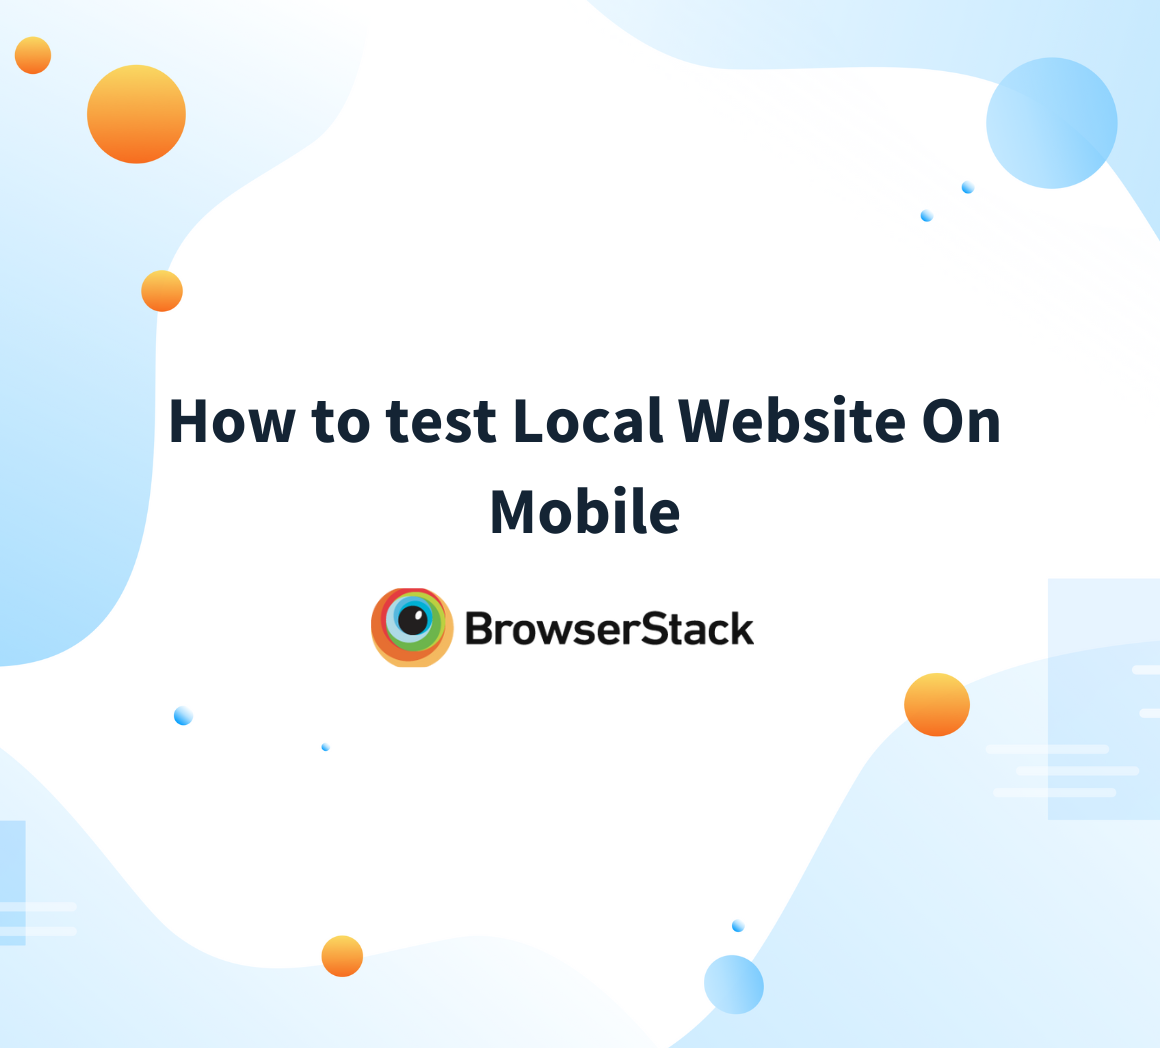 Test Local Websites on Mobile Devices